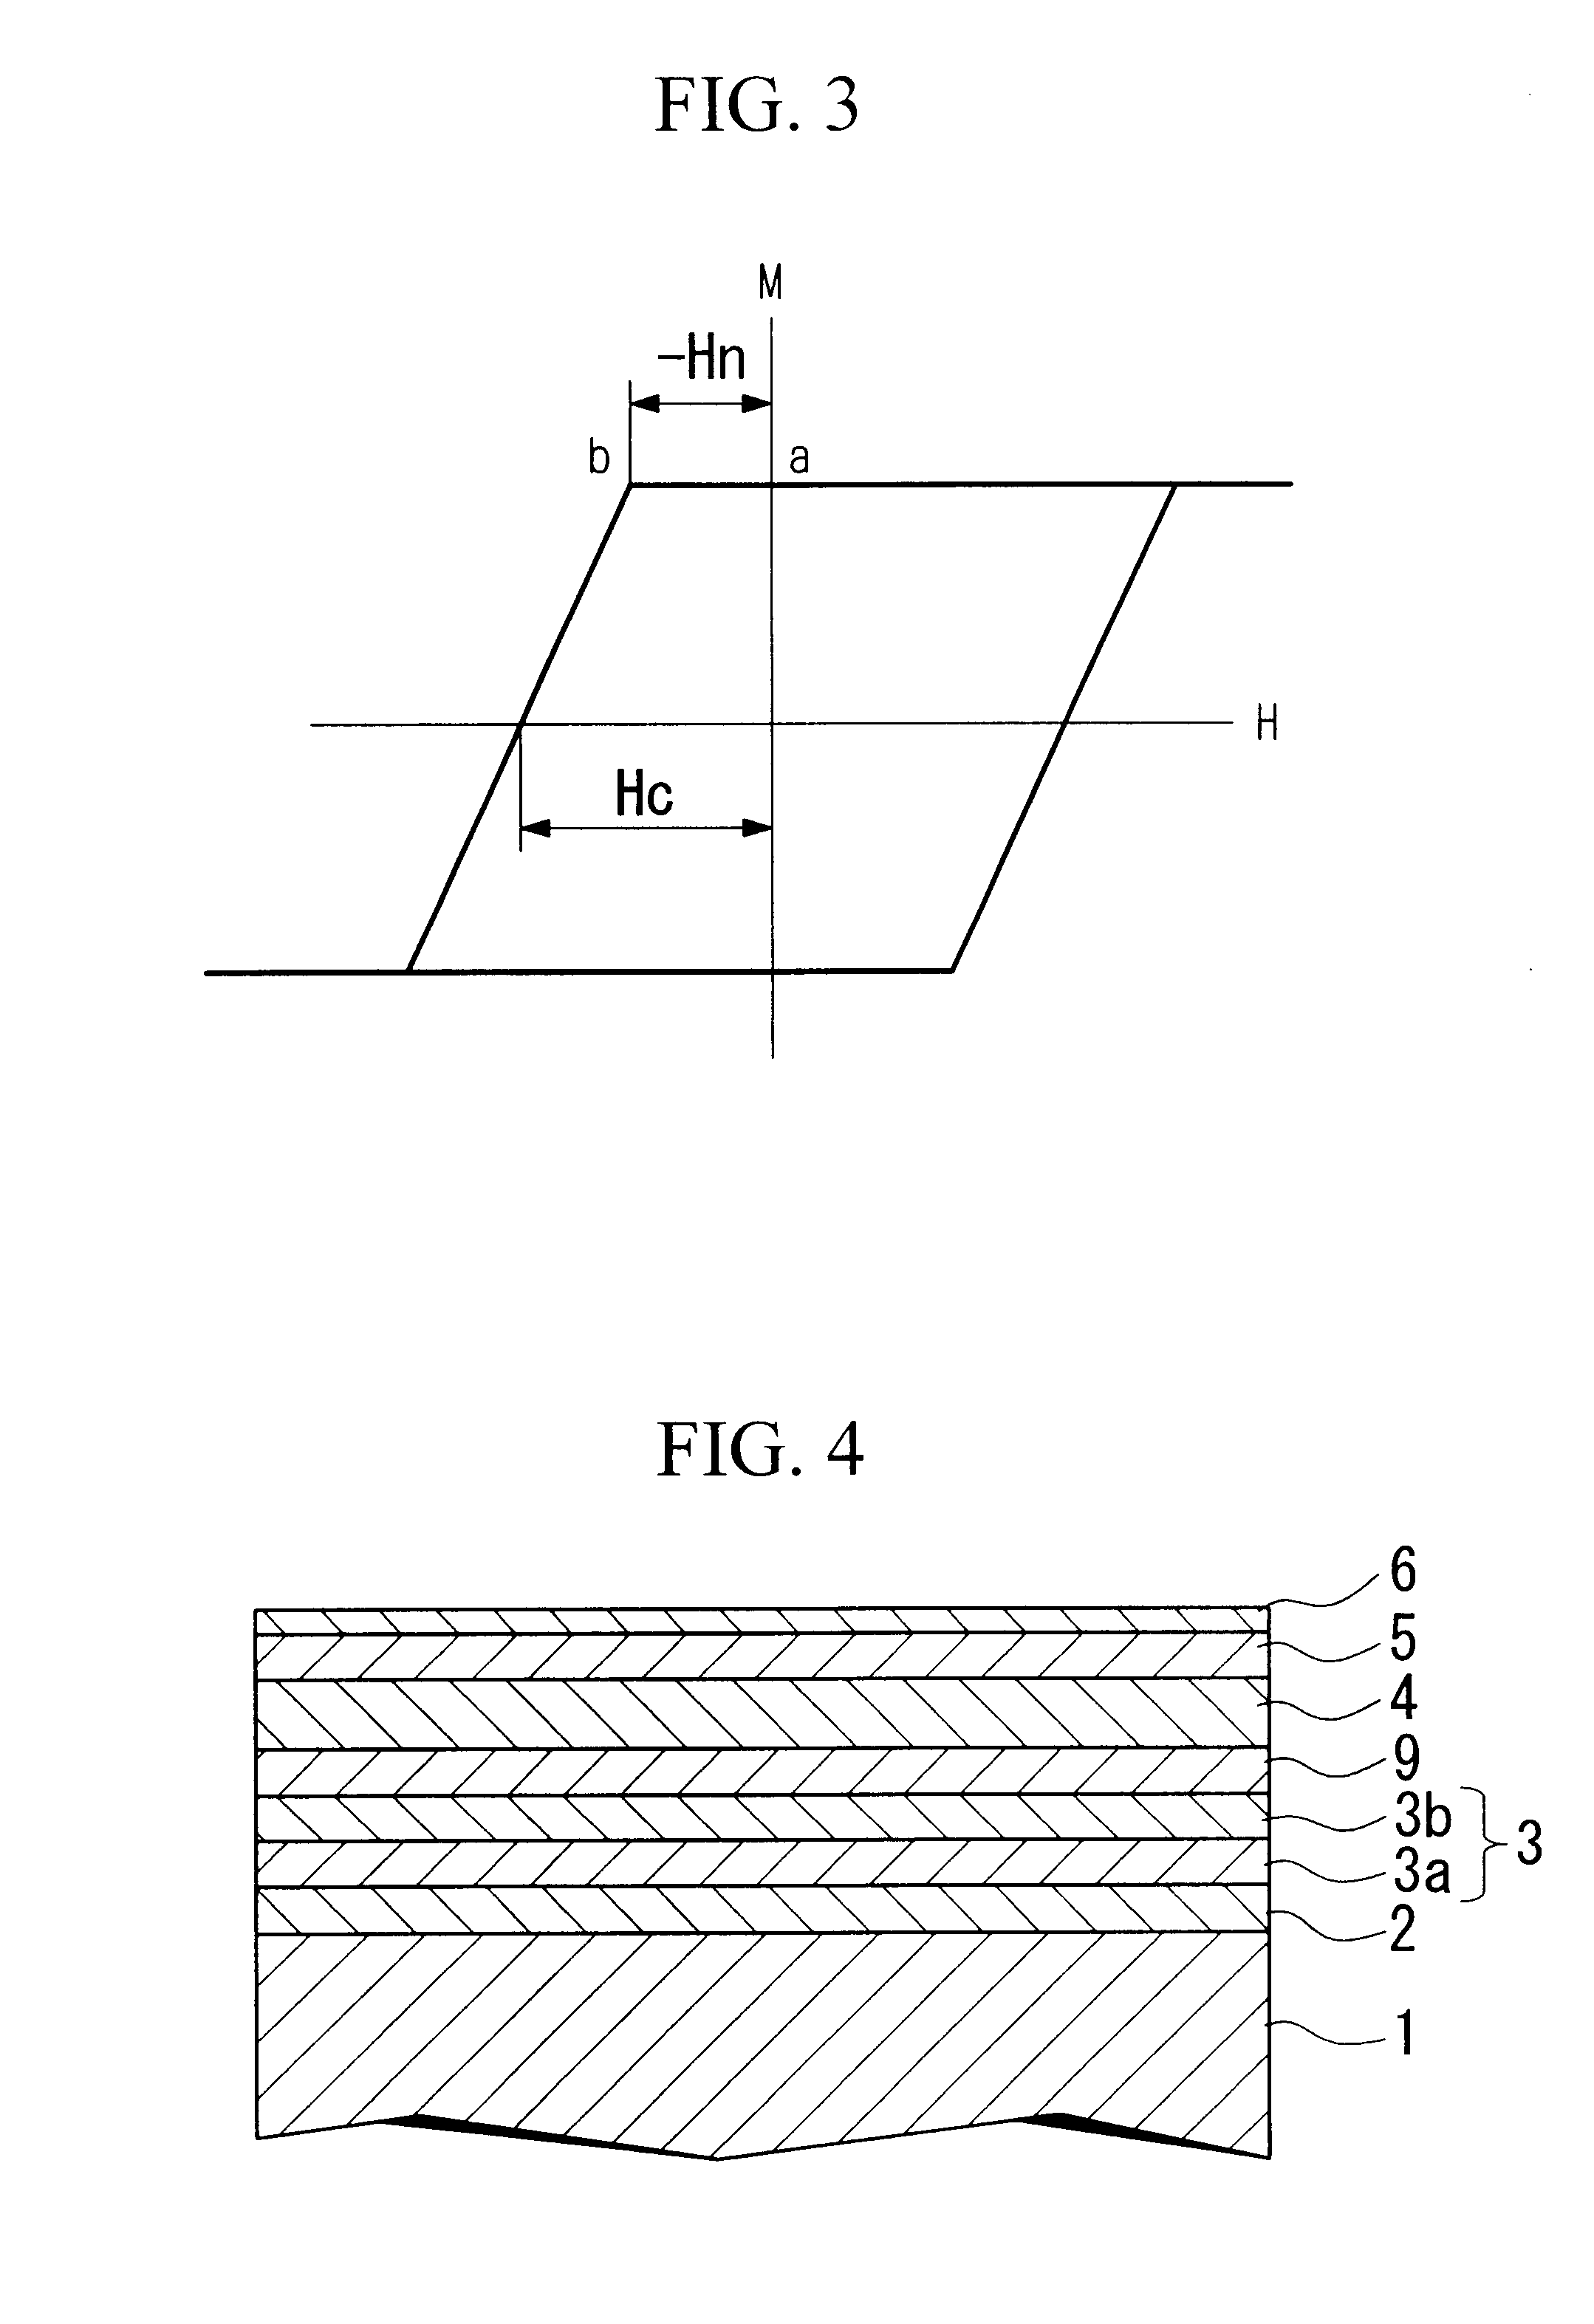 Magnetic recording medium, method of manufacture therefor, and apparatus for magnetic recording and reproducing recordings